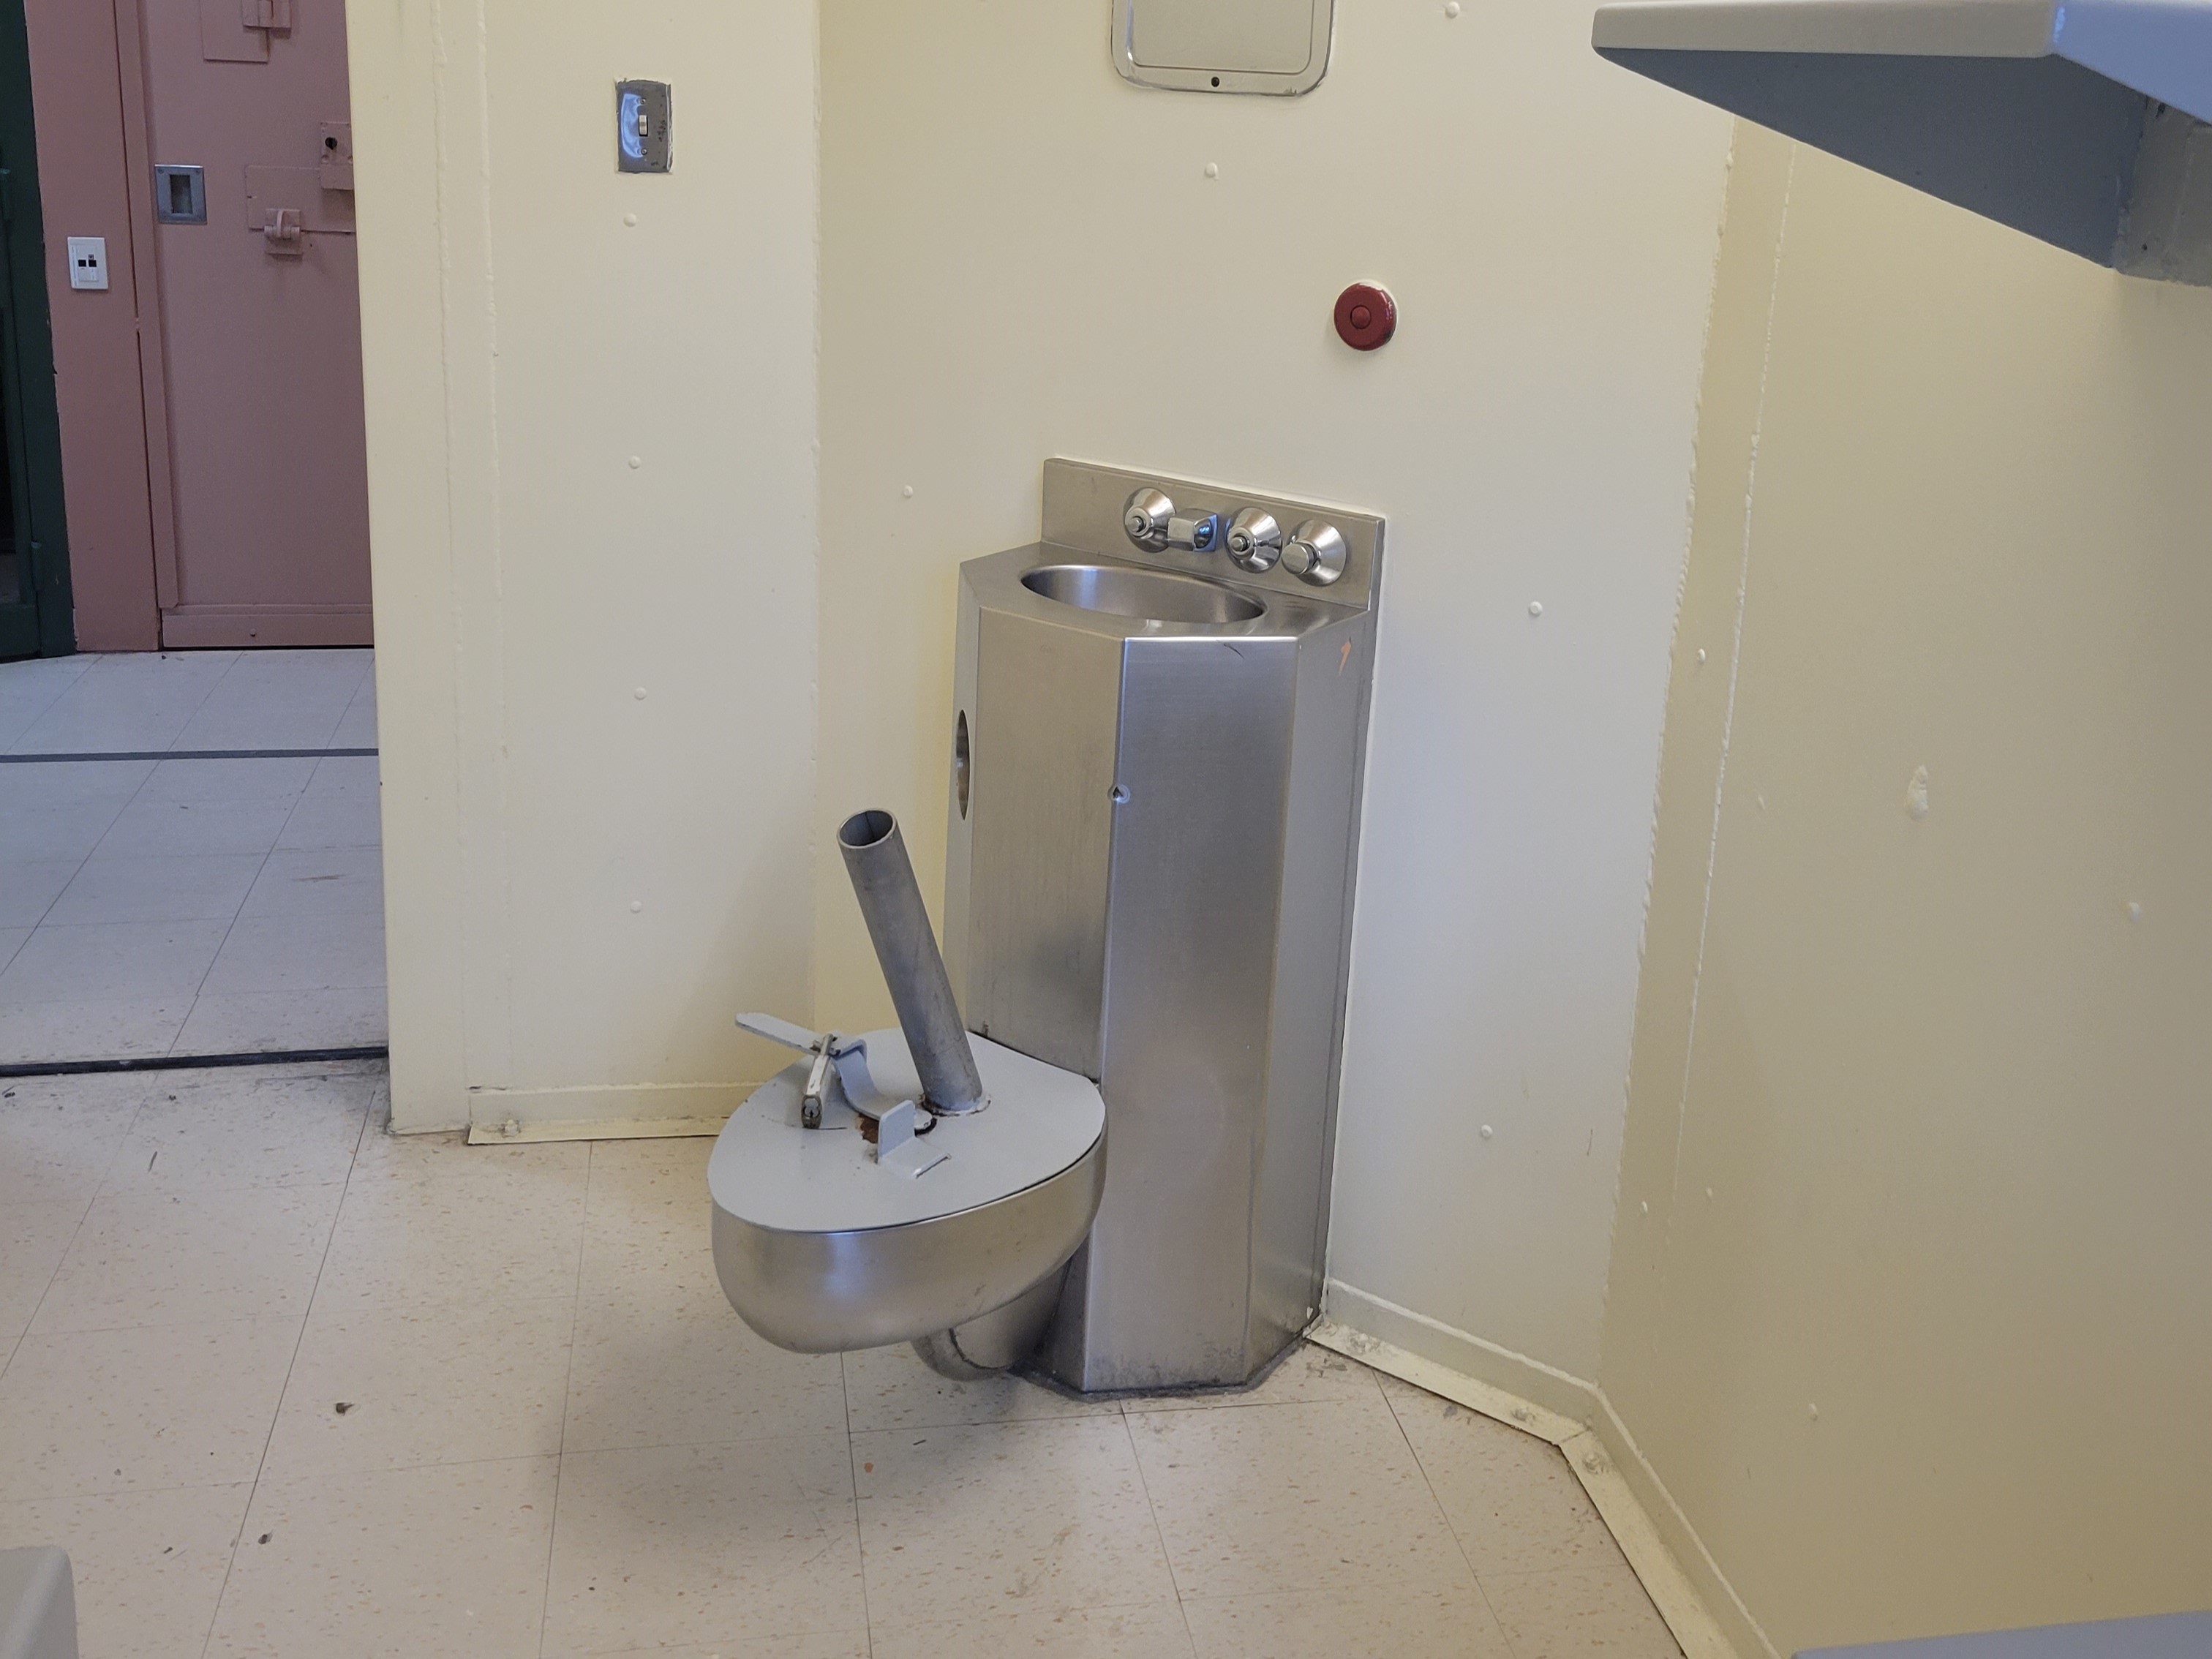 Photo of a dry cell toilet at La Macaza Institution modified to prevent defecation.